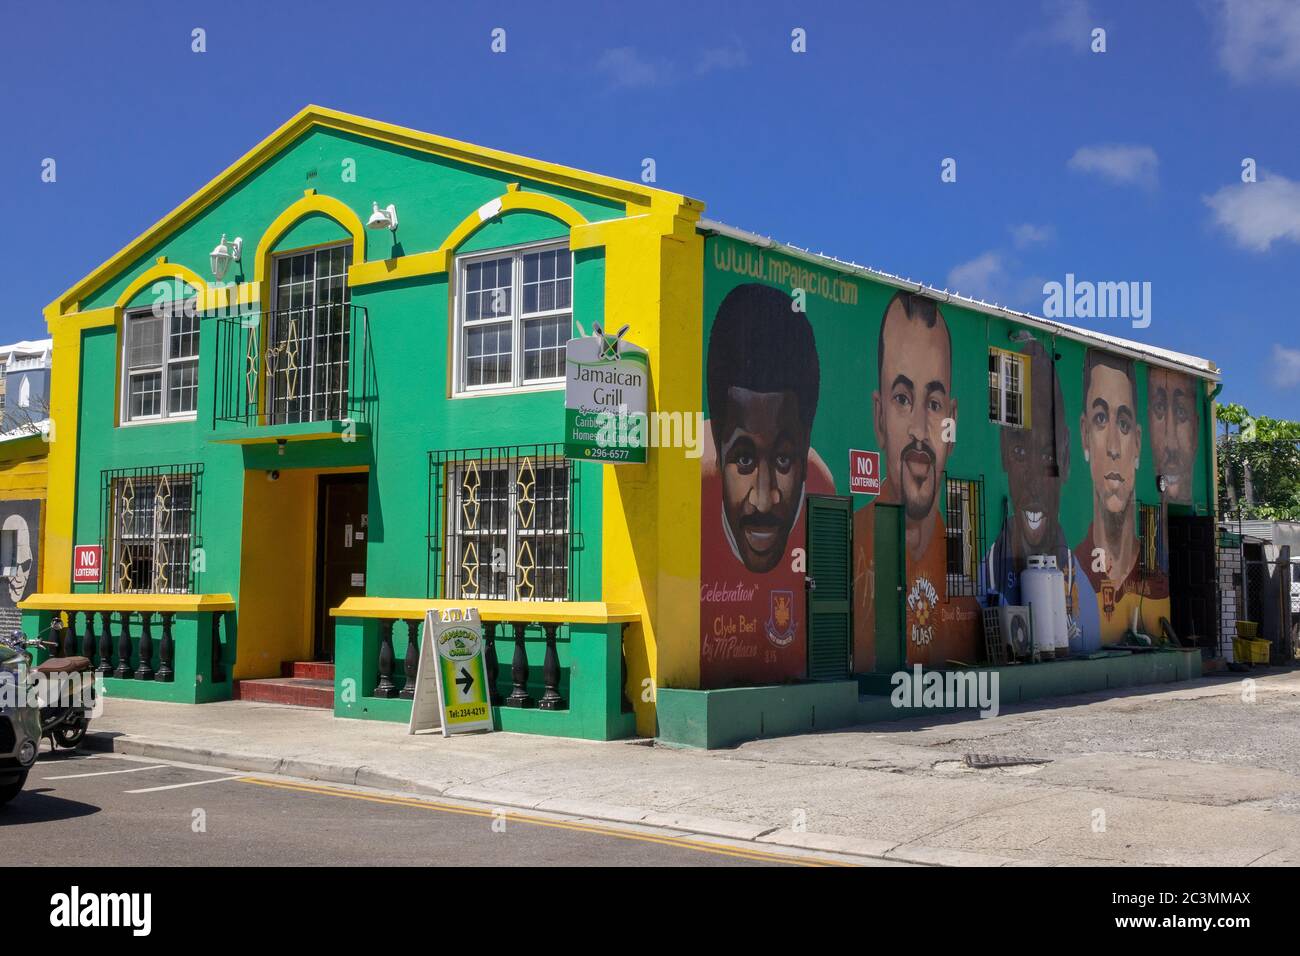 Jamaican Grill Restaurant Hamilton Bermuda With A Mural Of Famous Jamaican Footballers Clyde Best, David Bascome, Shaun Goater, Nahki Wells and Kyle L Stock Photo